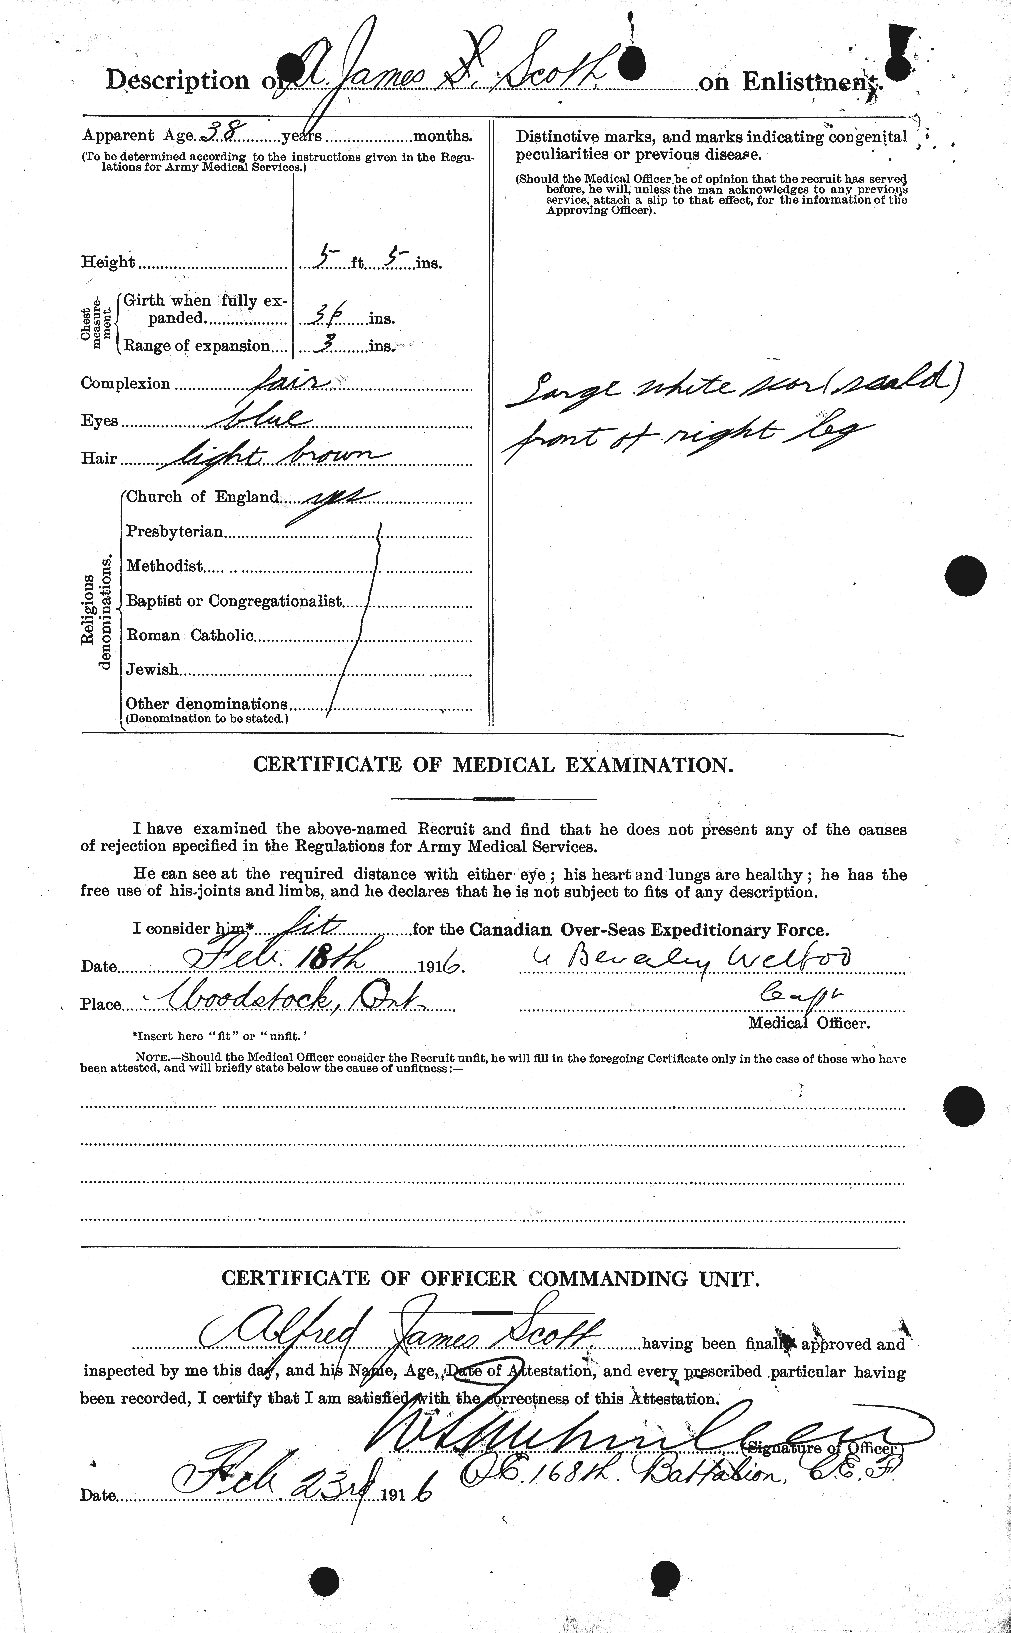 Personnel Records of the First World War - CEF 086581b